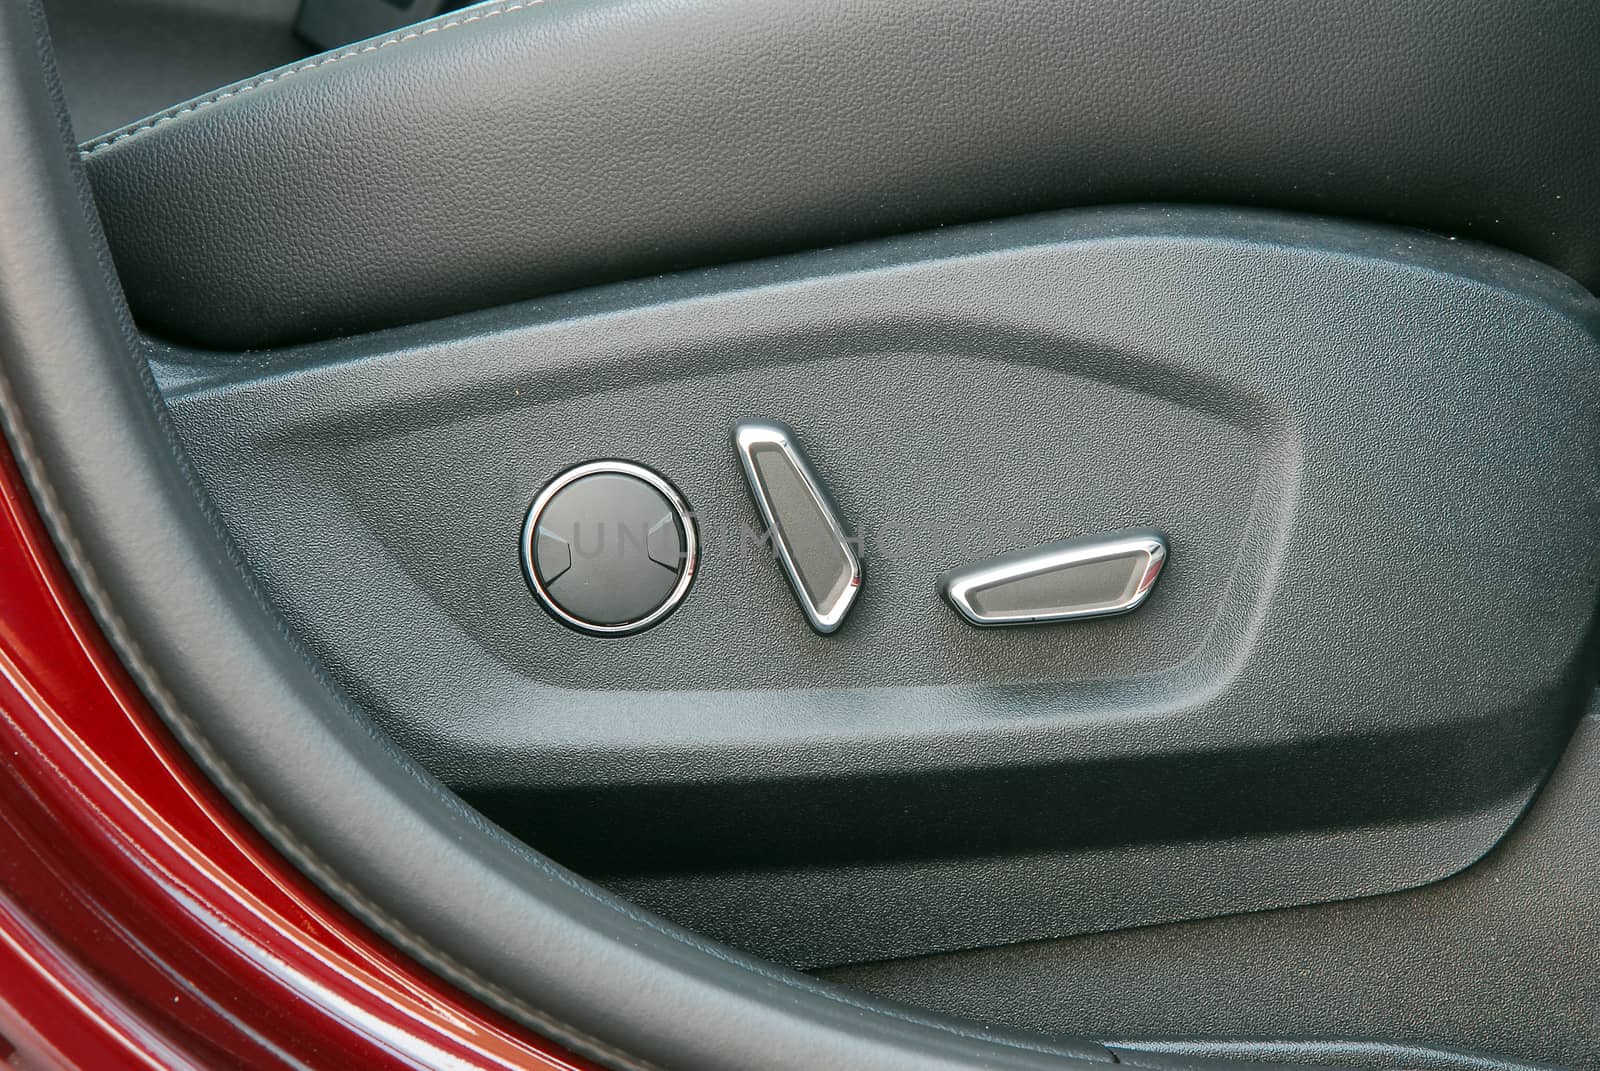 Buttons for adjusting seat position. Car interior detail